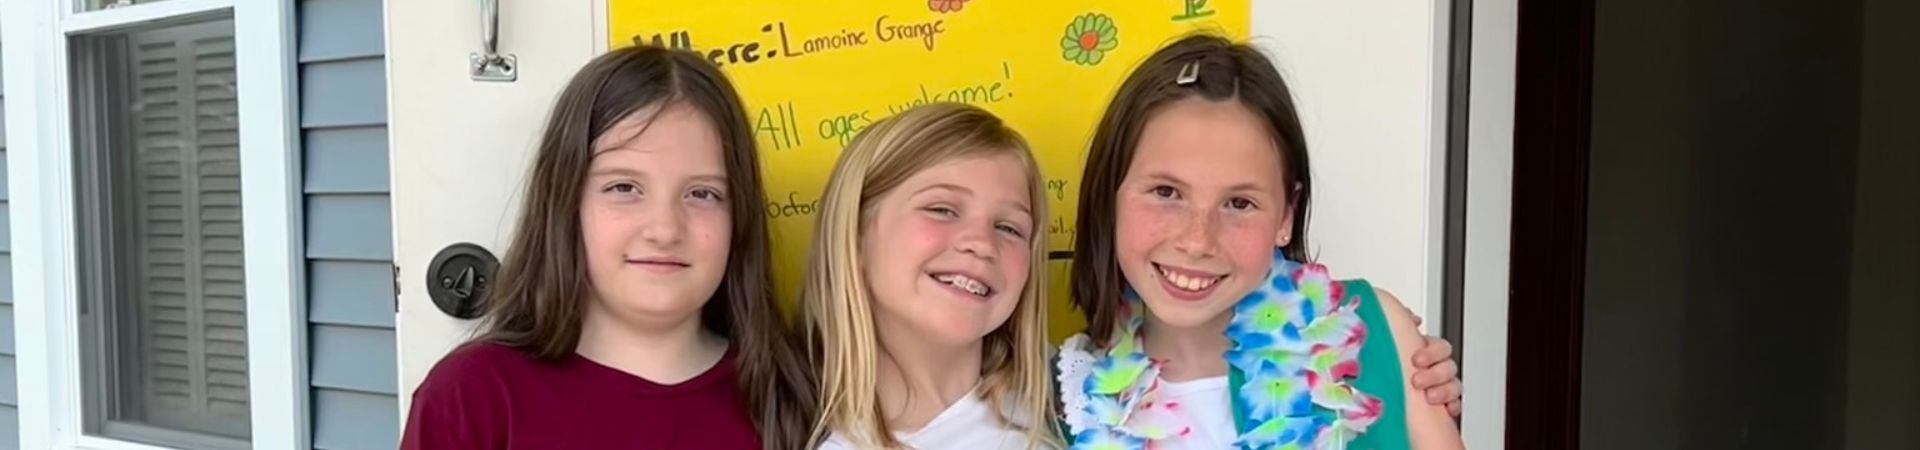  Three Girl Scouts standing in front of their talent show sign 